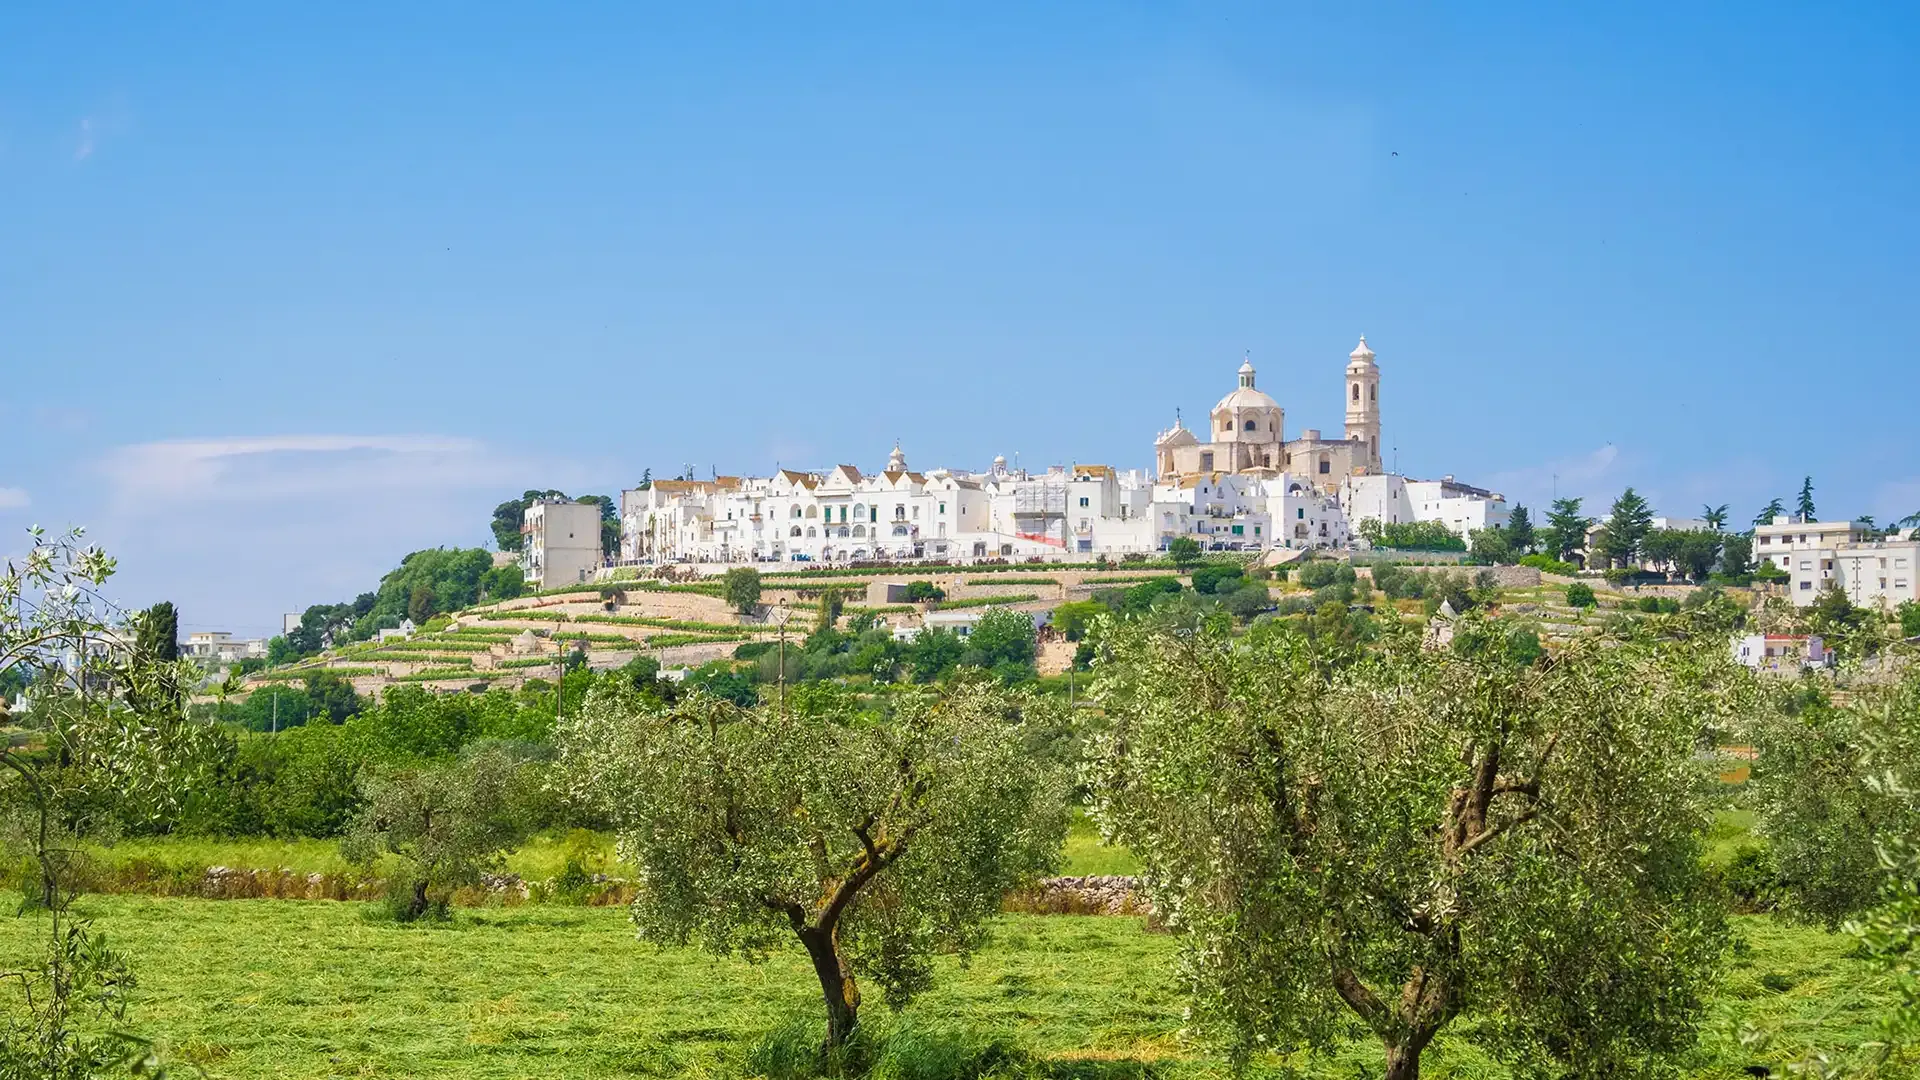 Panorama of a hill town with olive groves and blue sky.